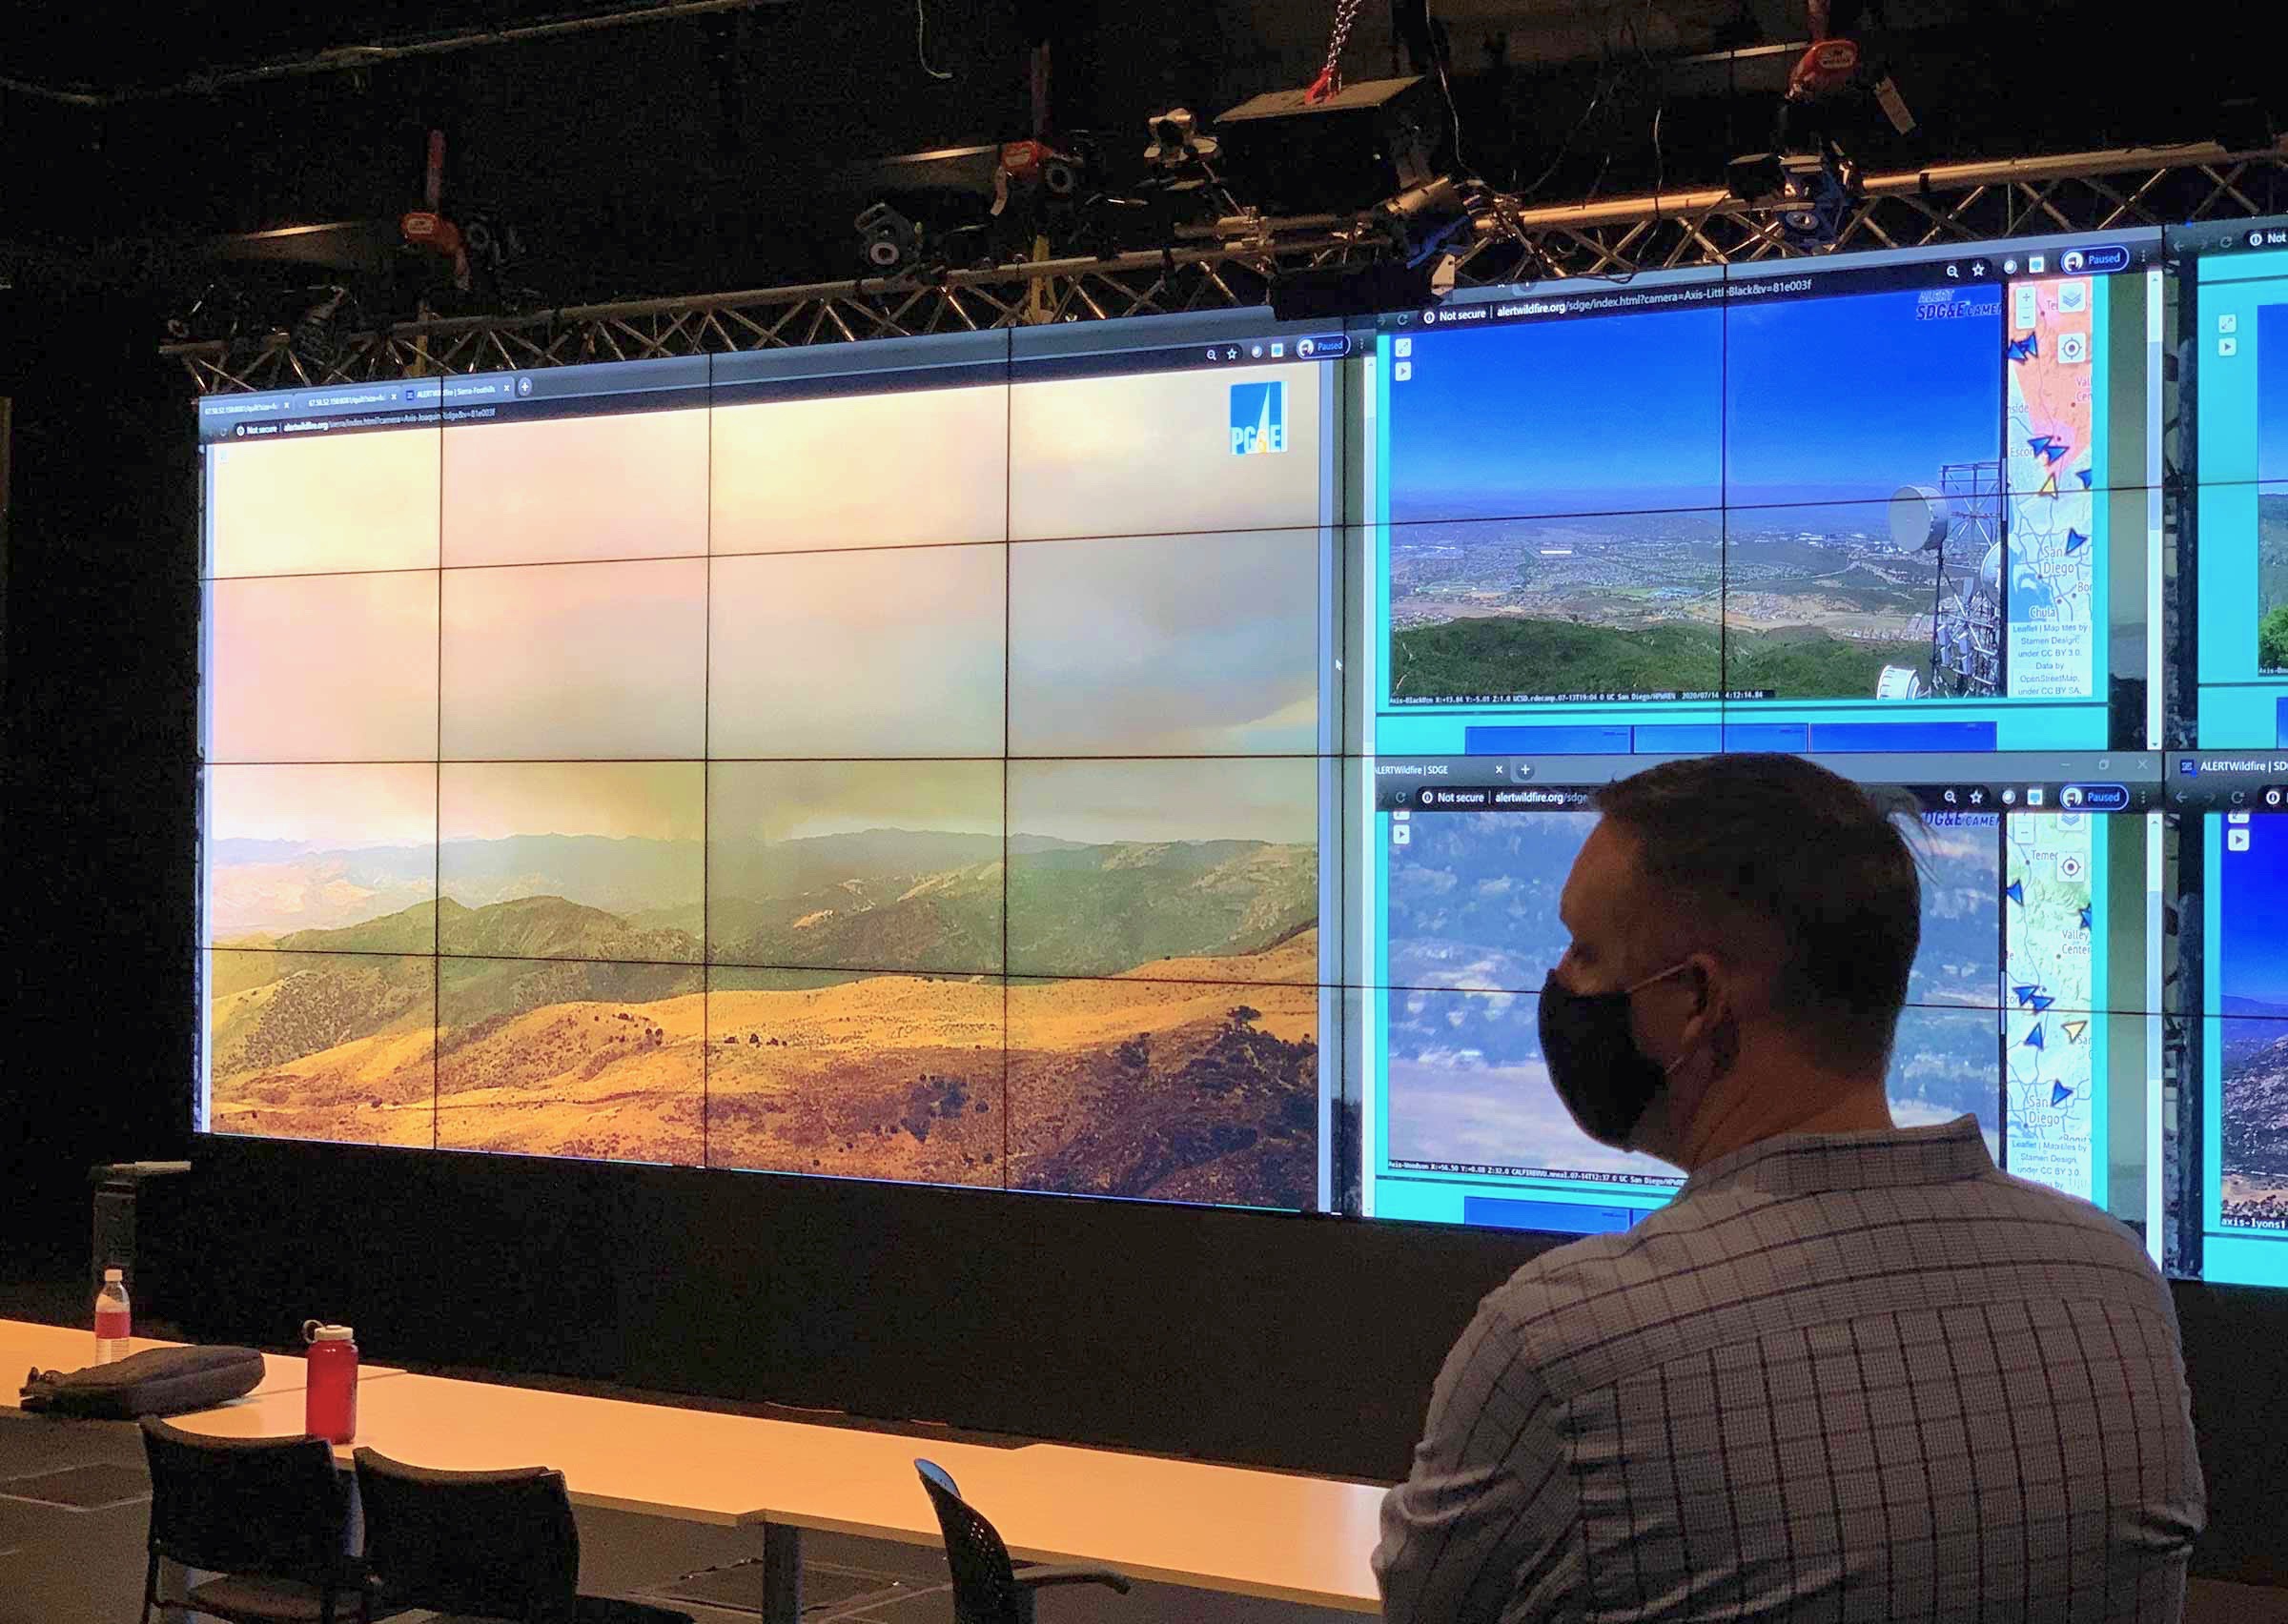 A first responder observing real-time ALERTWildfire camera network feeds in UC San Diego’s VRroom, a room-scale visual analytics environment for collaborative big-data analytics.